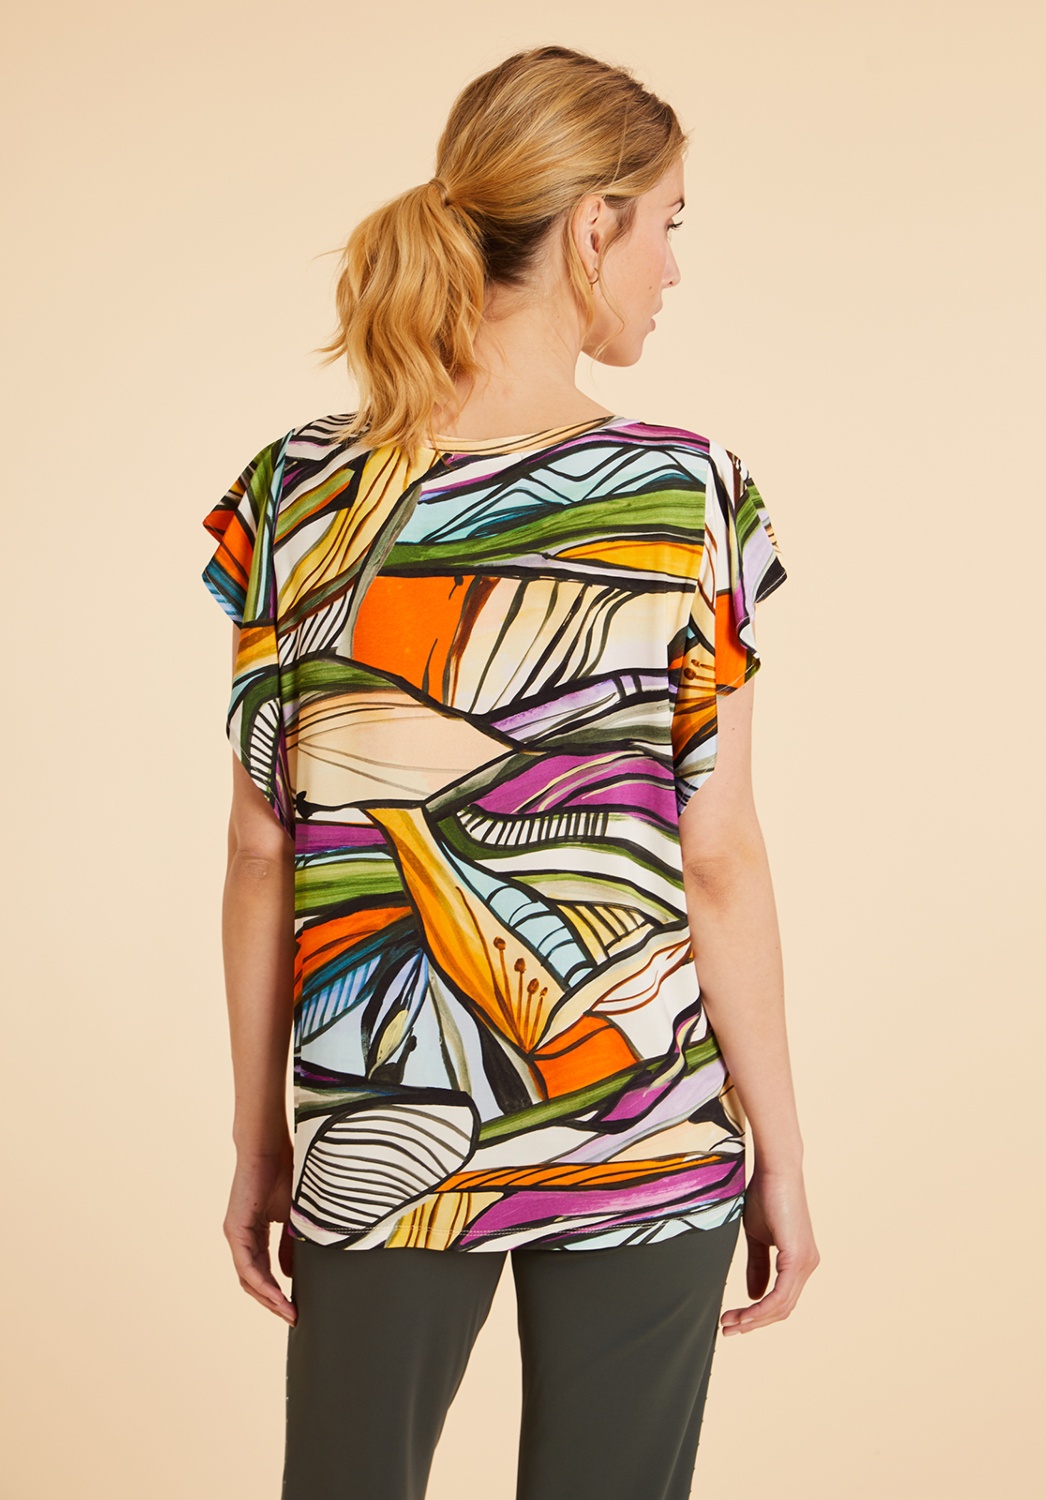 Multicolored Leaves T-shirt 2